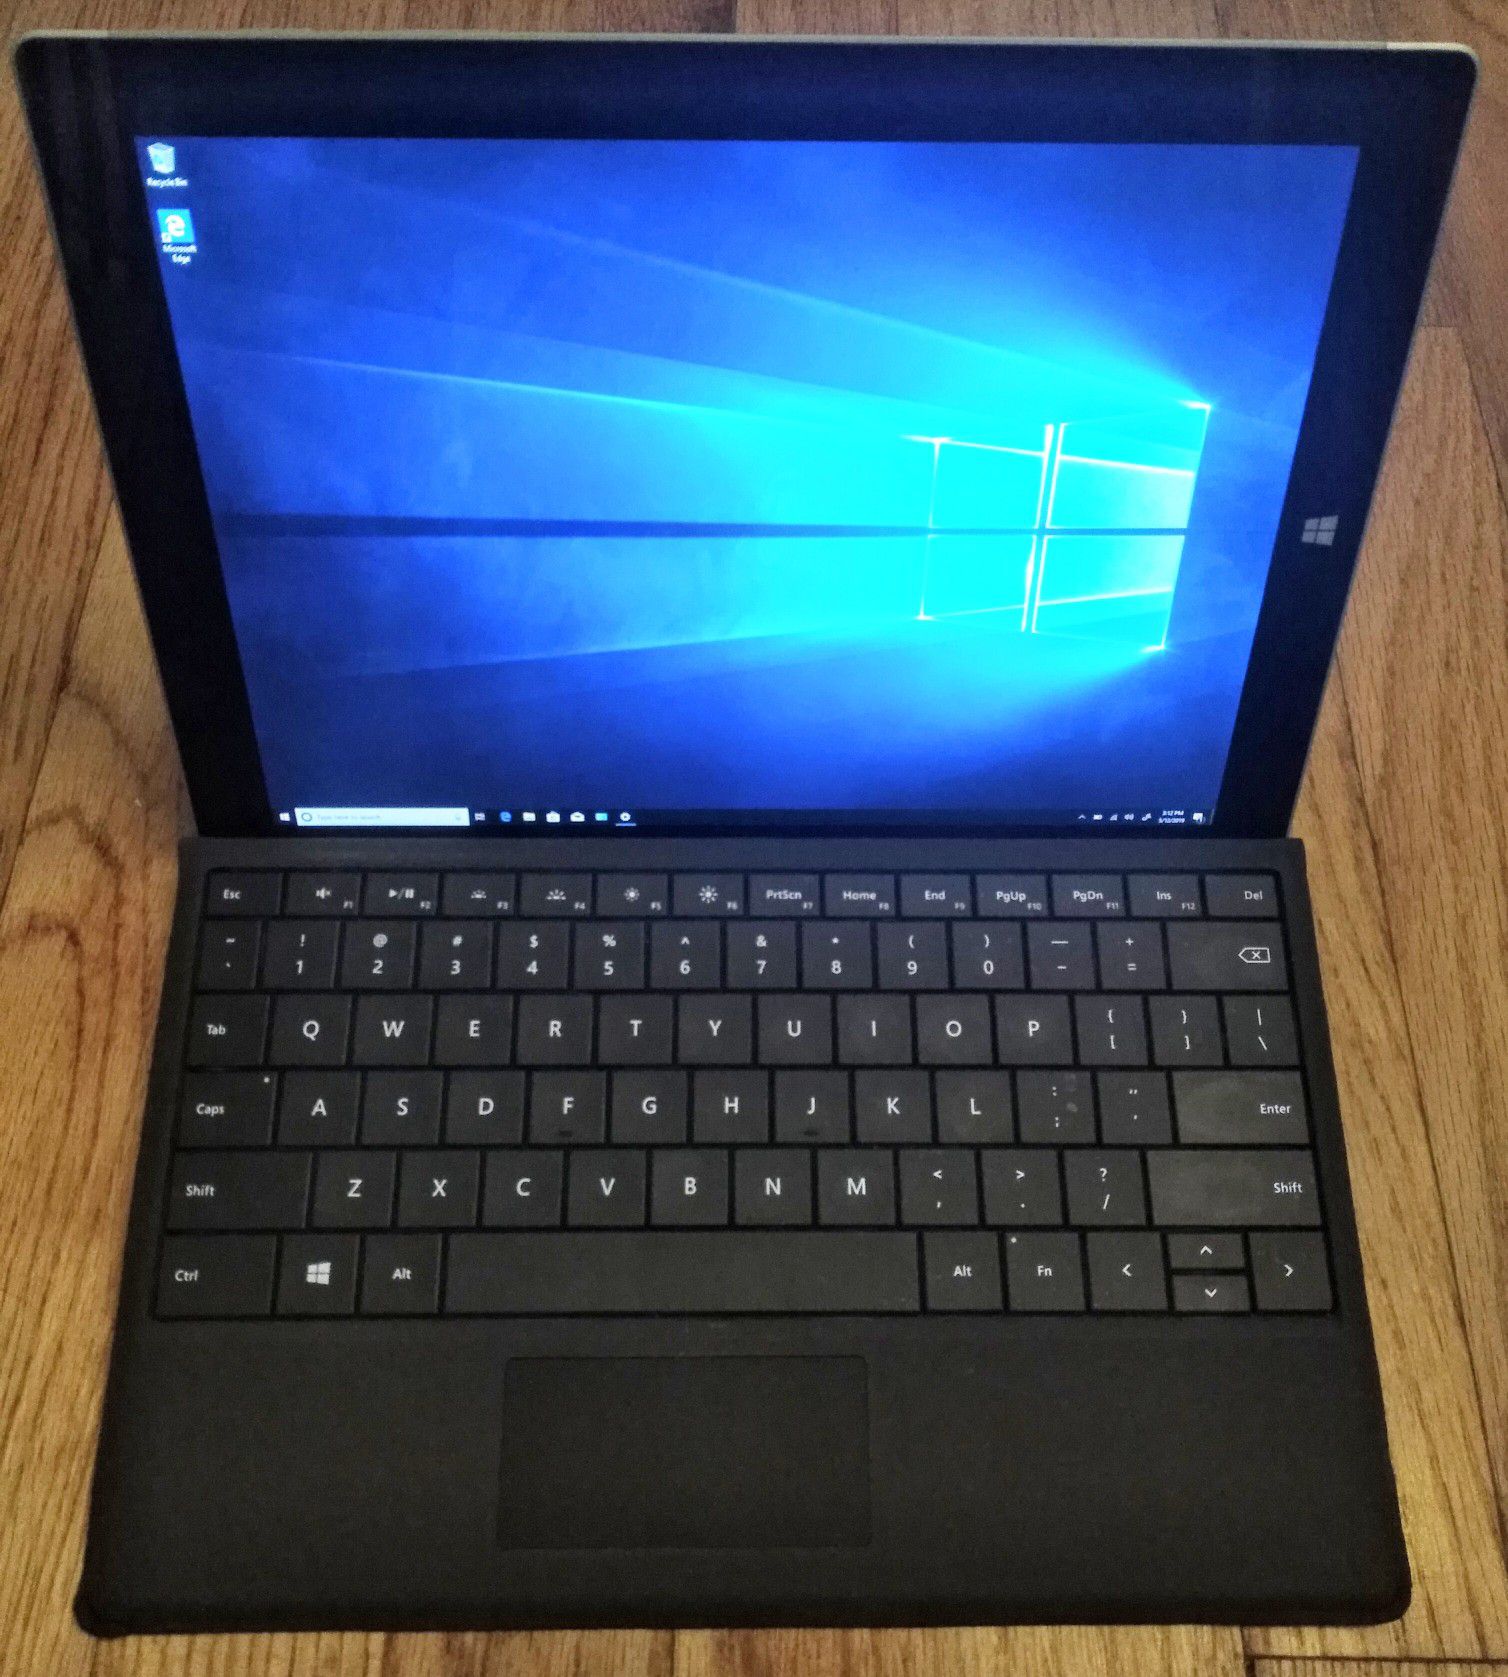 Microsoft Surface 3 Touchscreen Laptop Intel Quad Core 1920x1080 FHD LCD Webcam HDMI Wi-Fi Bluetooth Windows 10 Like New Works Perfectly